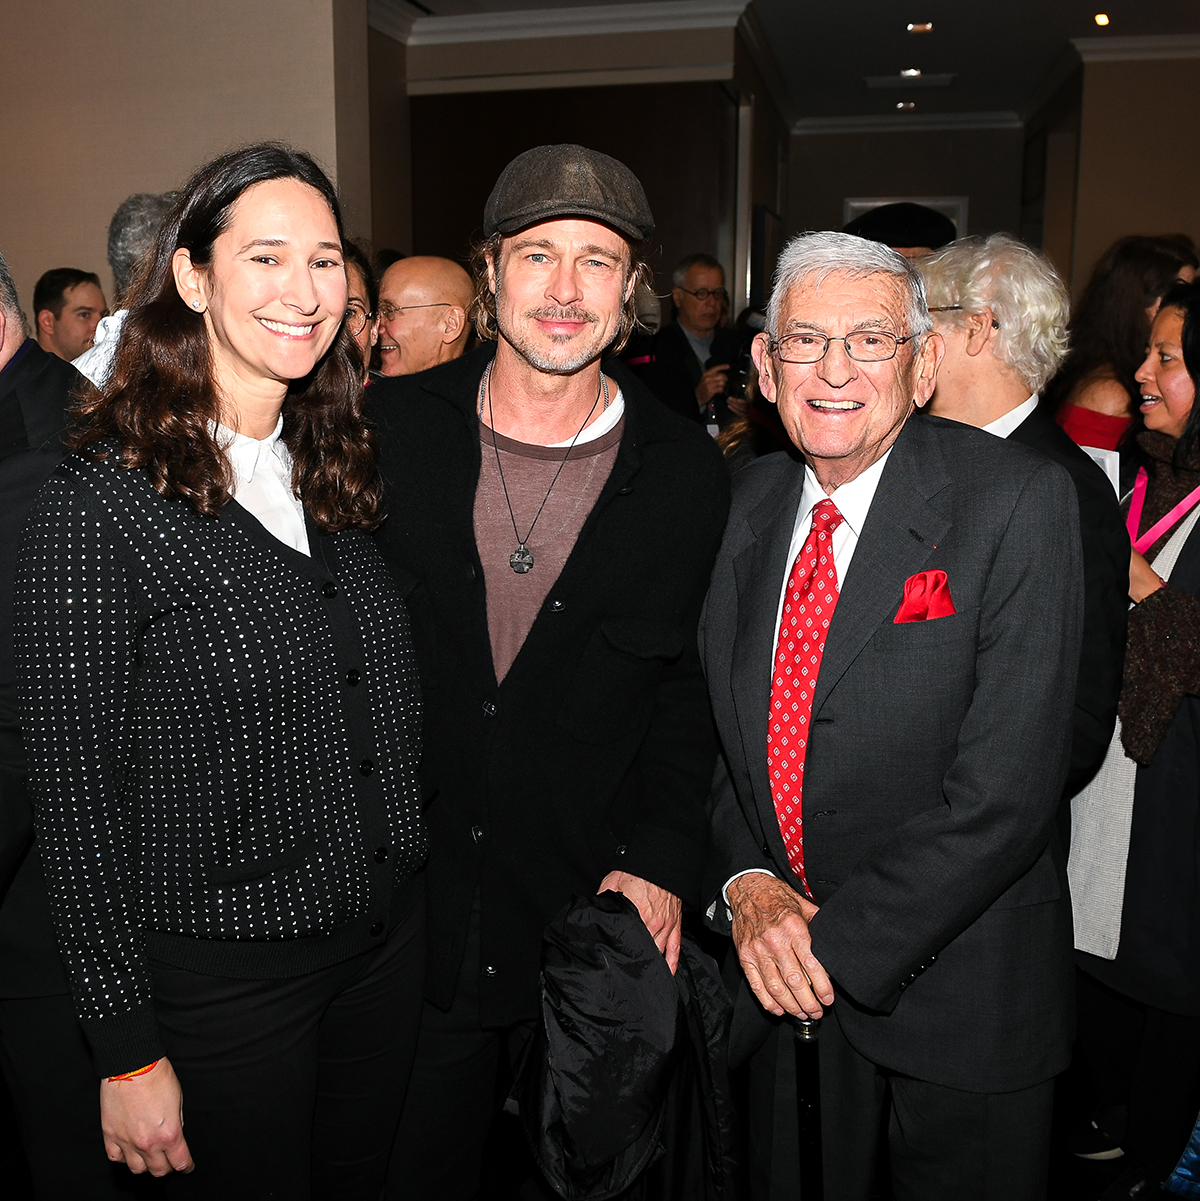 A woman standing next to Brad Pitt, in a hat jumper and coat and another man wearing a red tie and pocket handkerchief